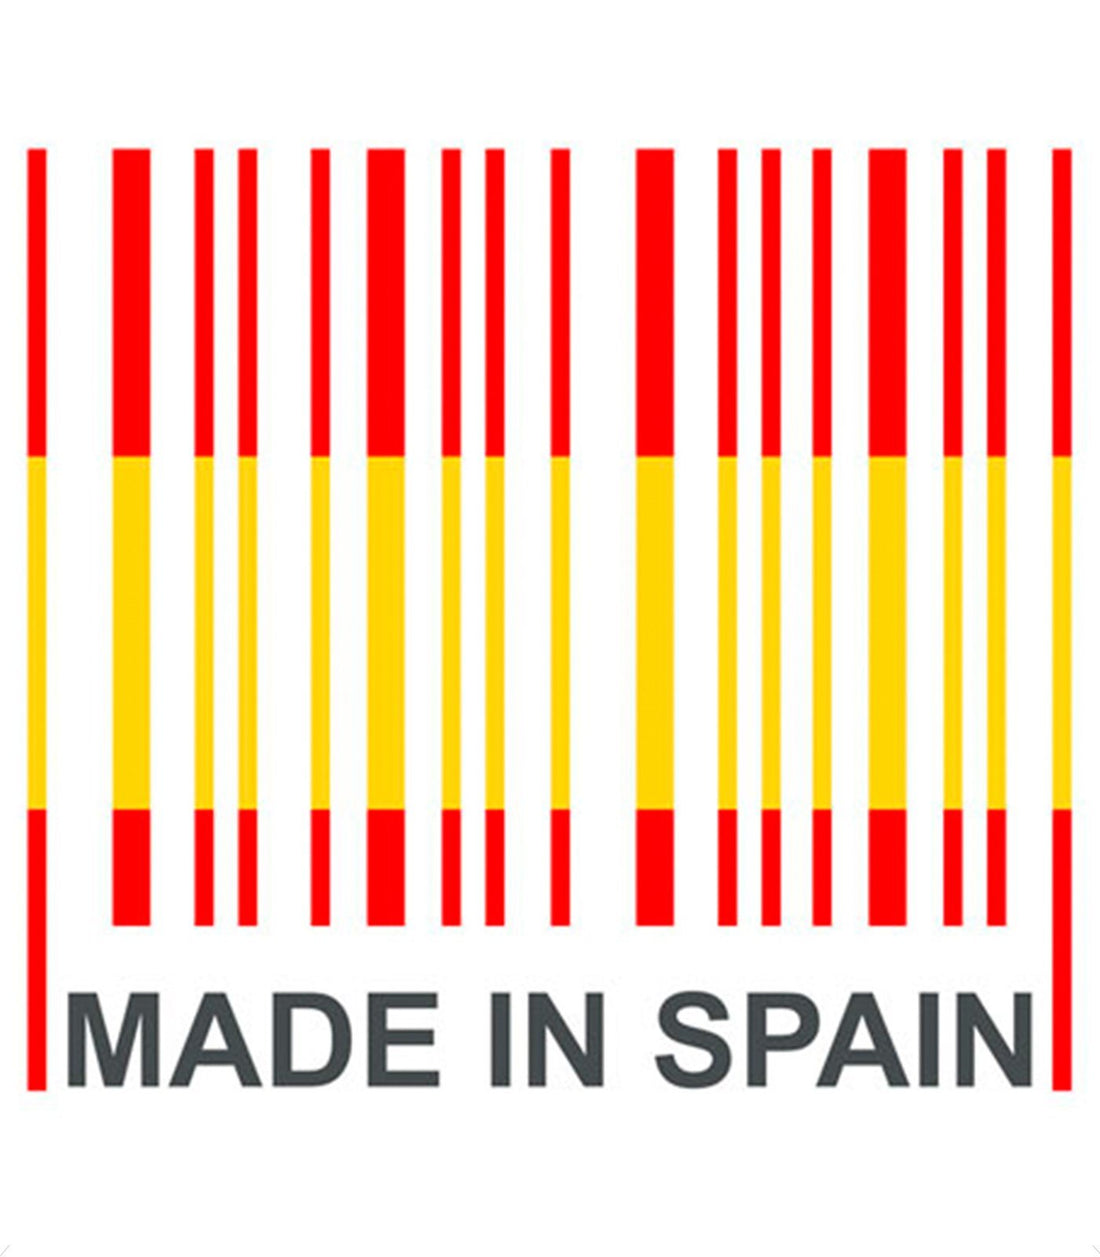 ¿Qué significa Made in Spain?